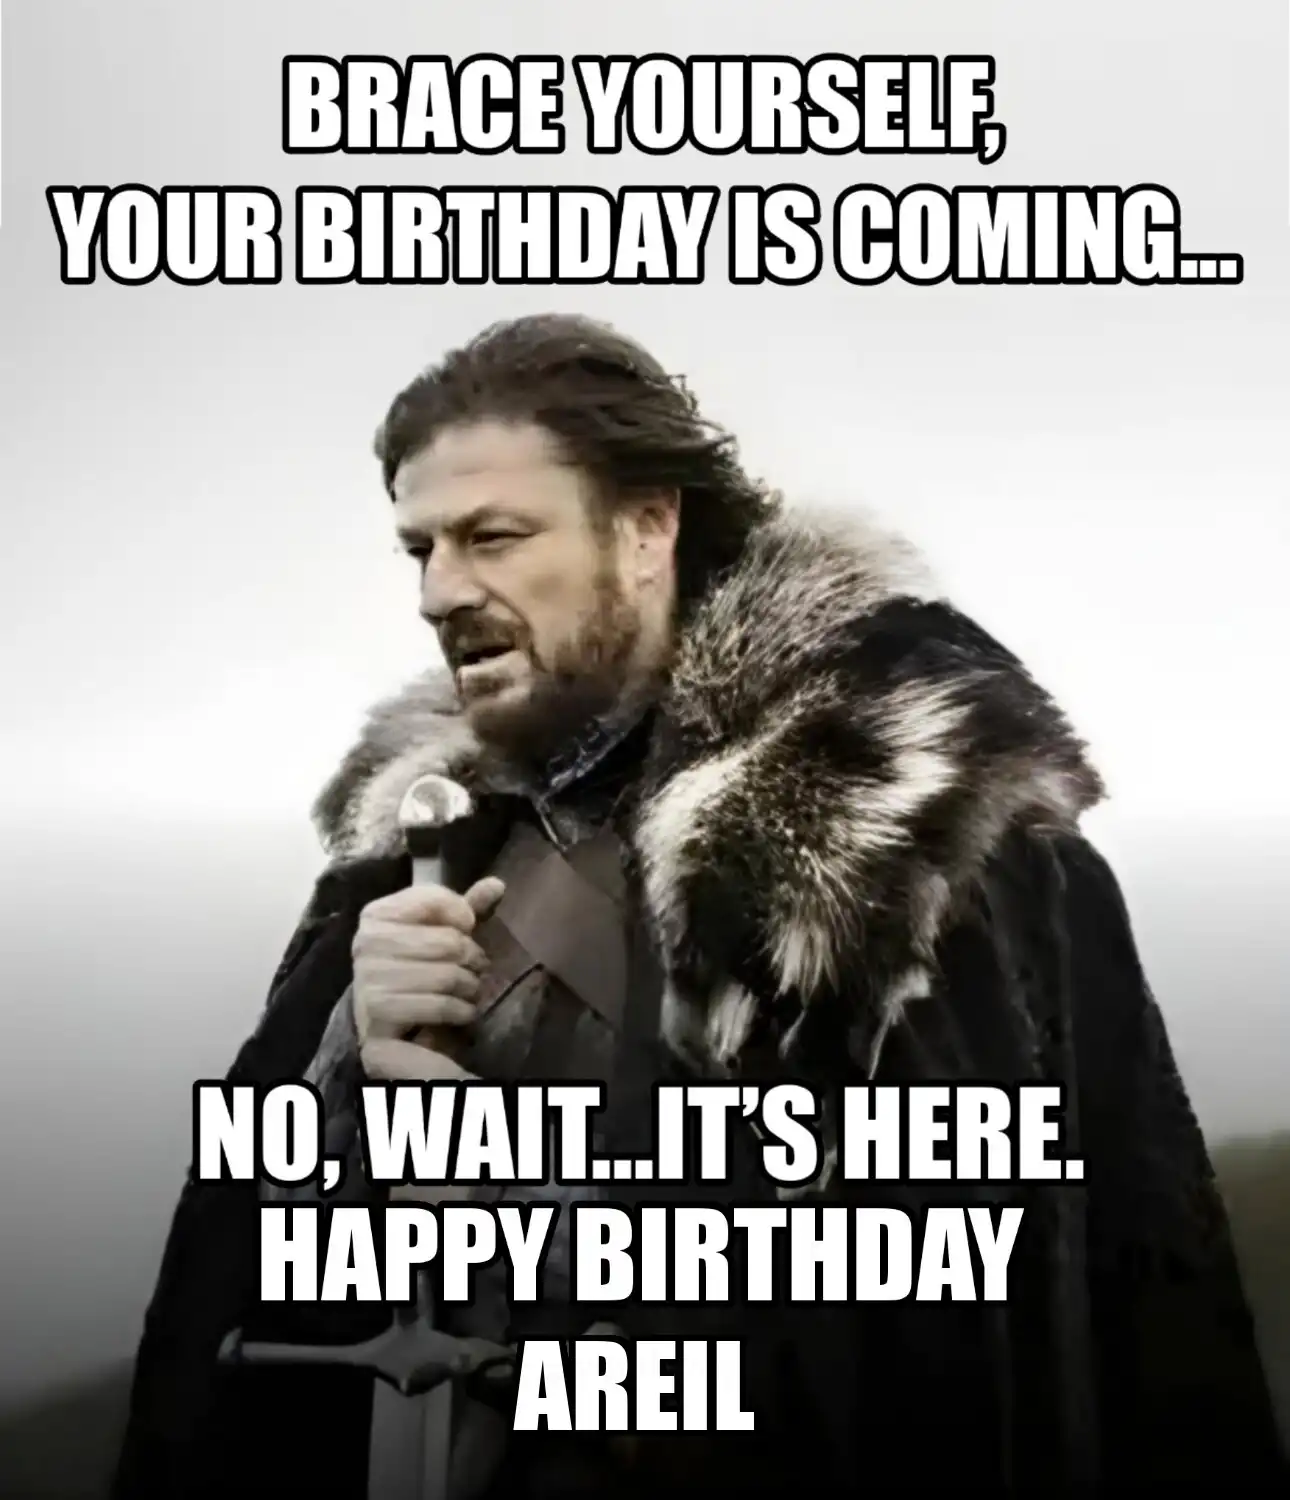 Happy Birthday Areil Brace Yourself Your Birthday Is Coming Meme